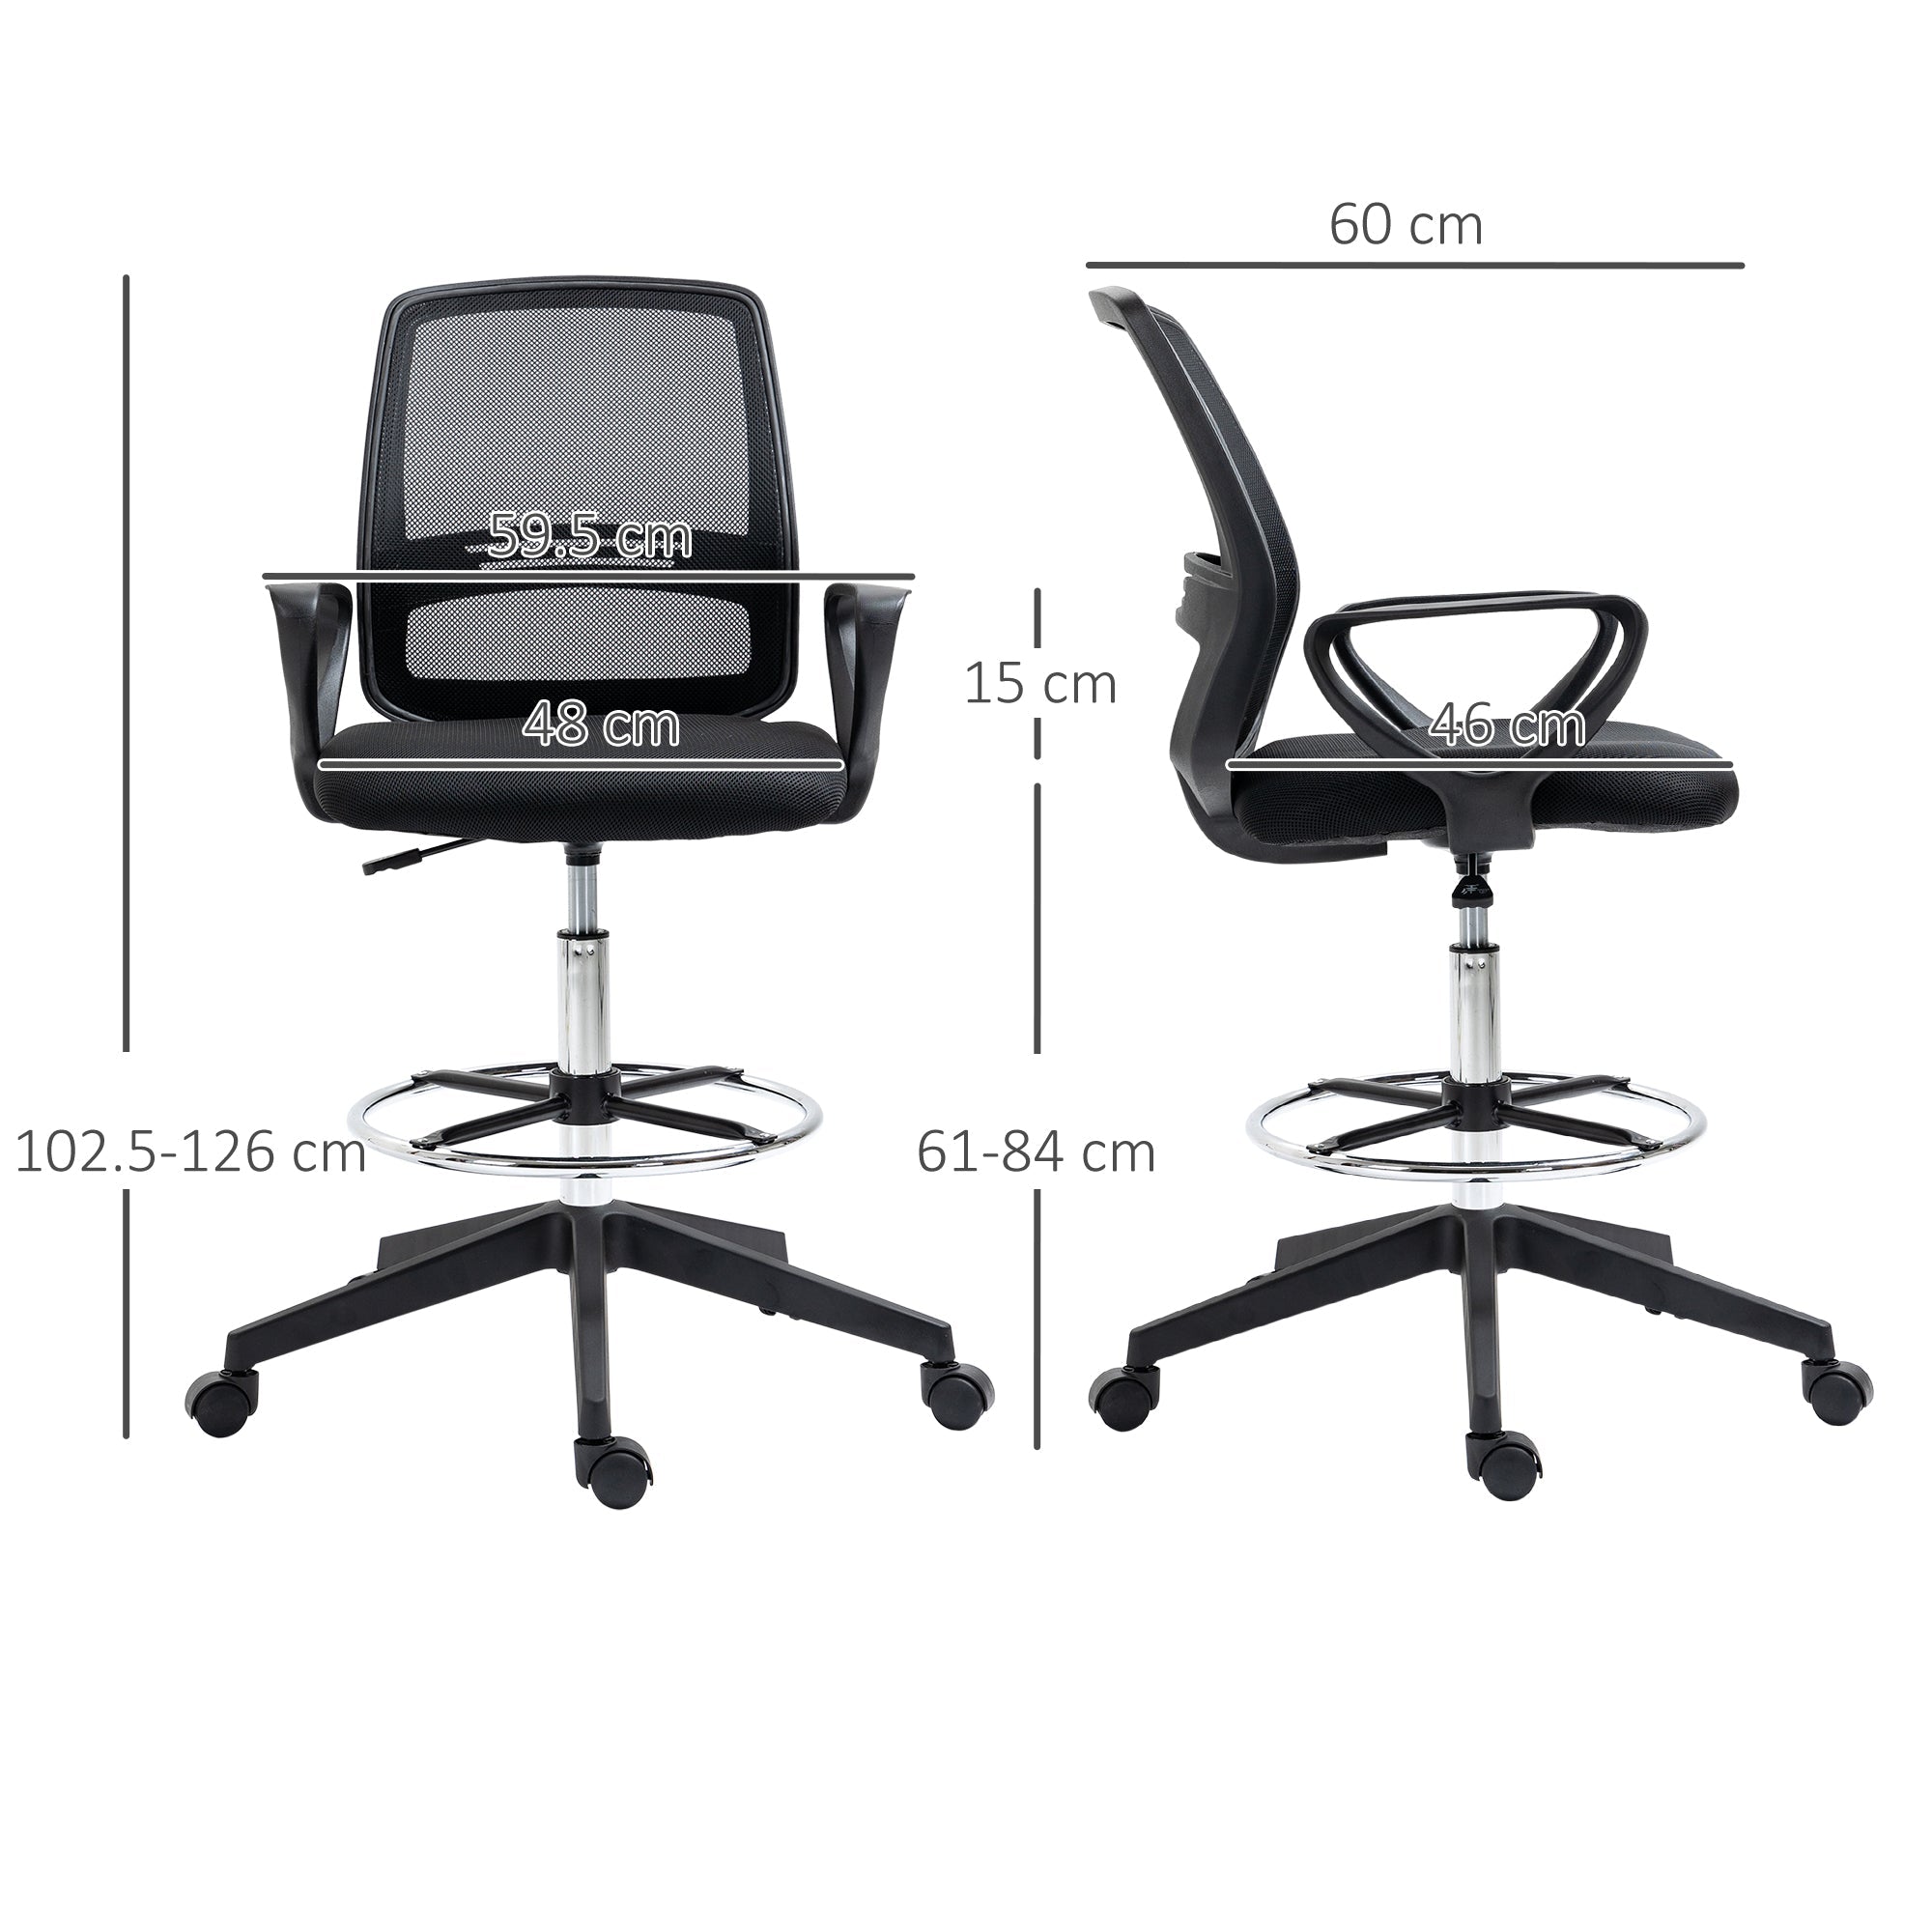 Vinsetto Ergonomic Mesh Back Draughtsman Chairs Tall Office Chair with Adjustable Height and Footrest 360° Swivel, Set of 5 - TovaHaus